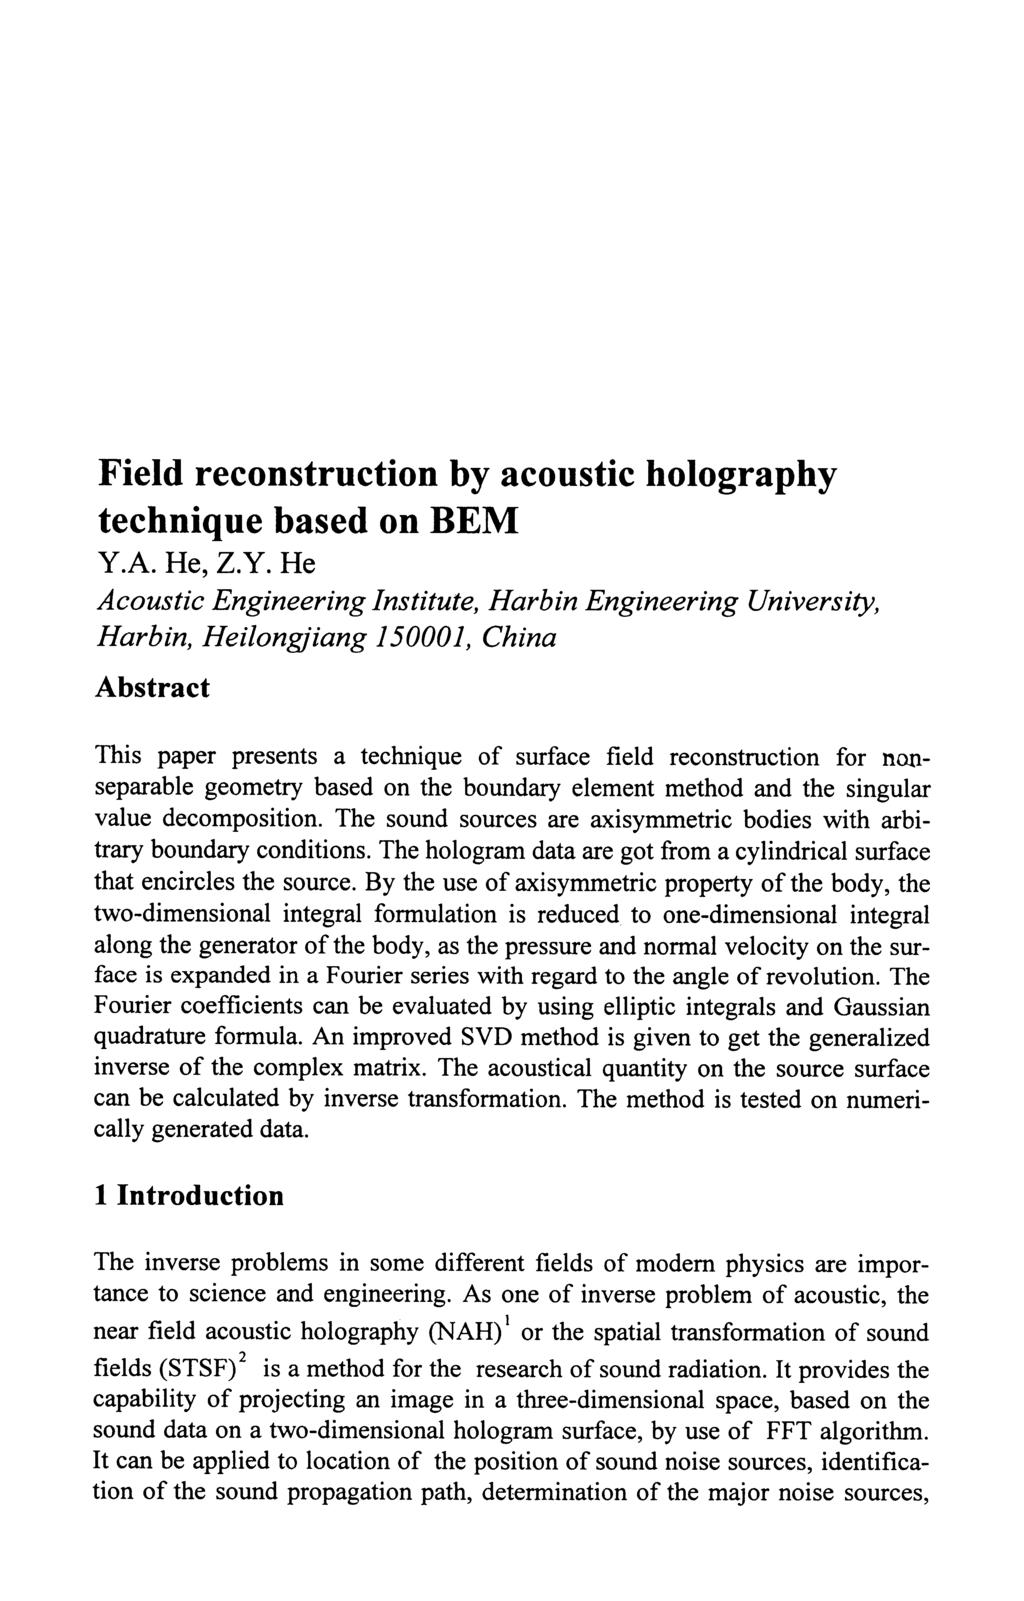 Field reconstruction by acoustic holography technique based on BEM Y.